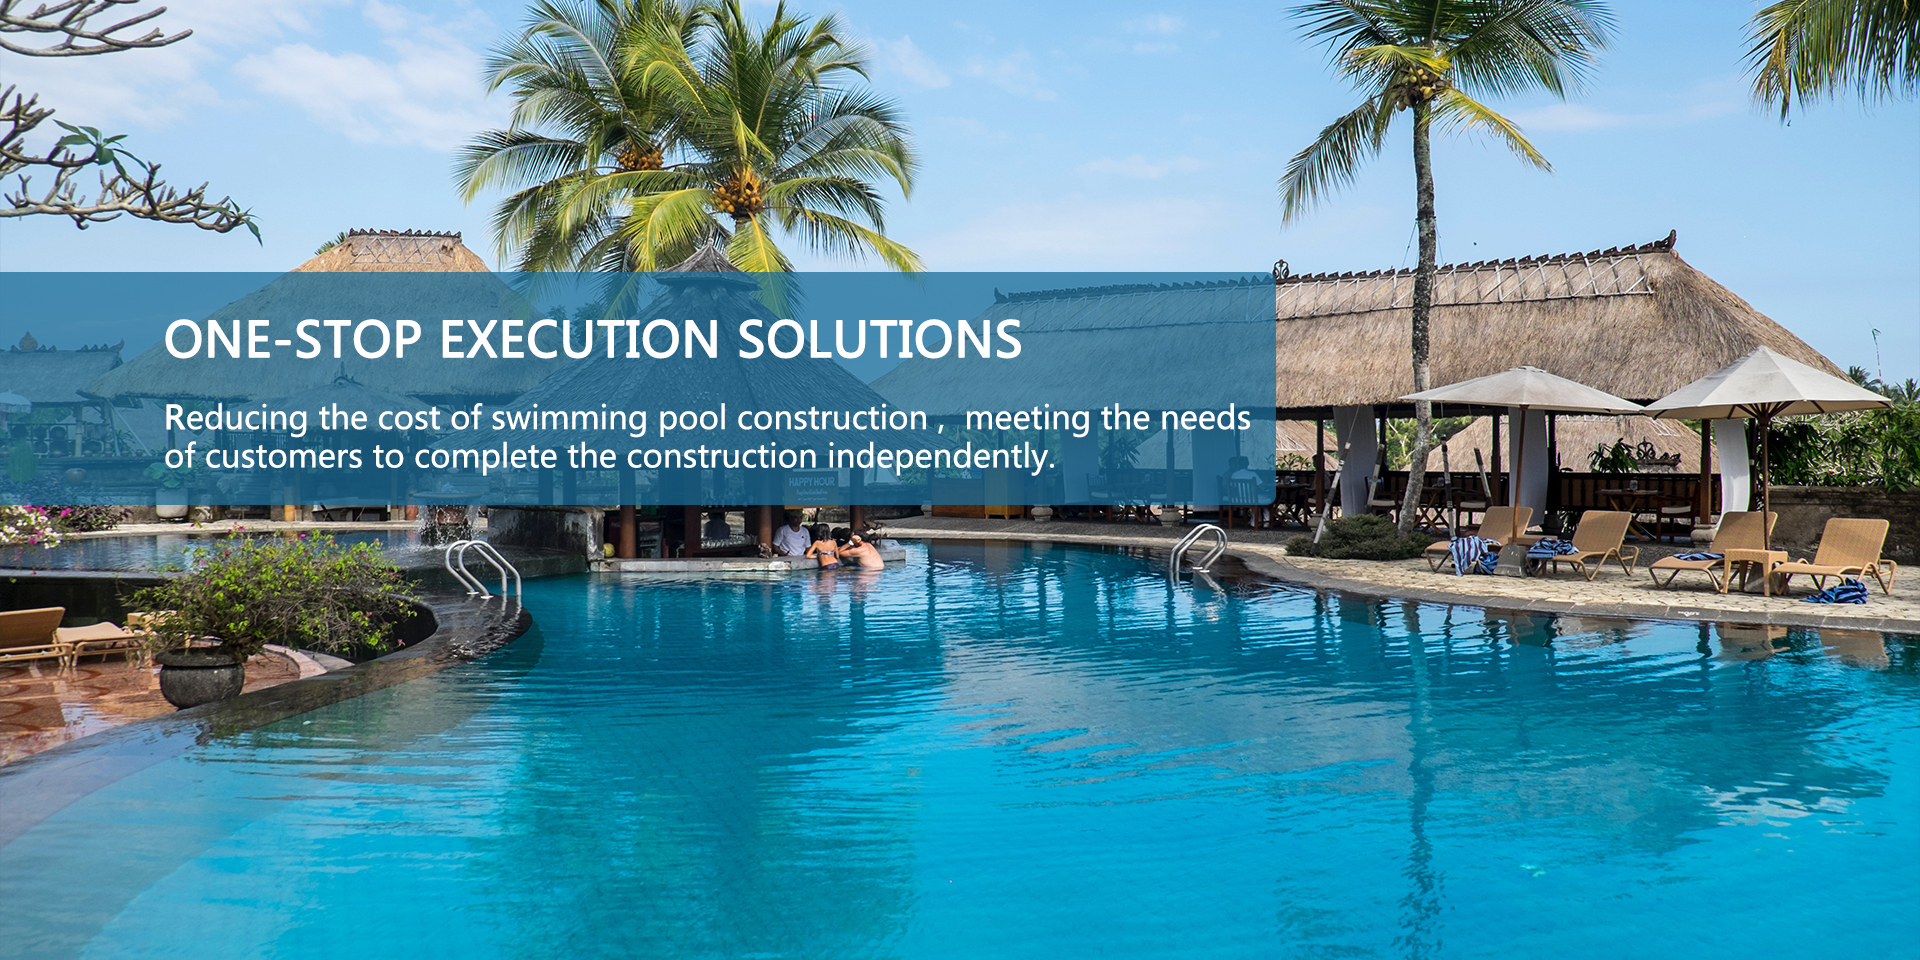 one-stop execution solutions